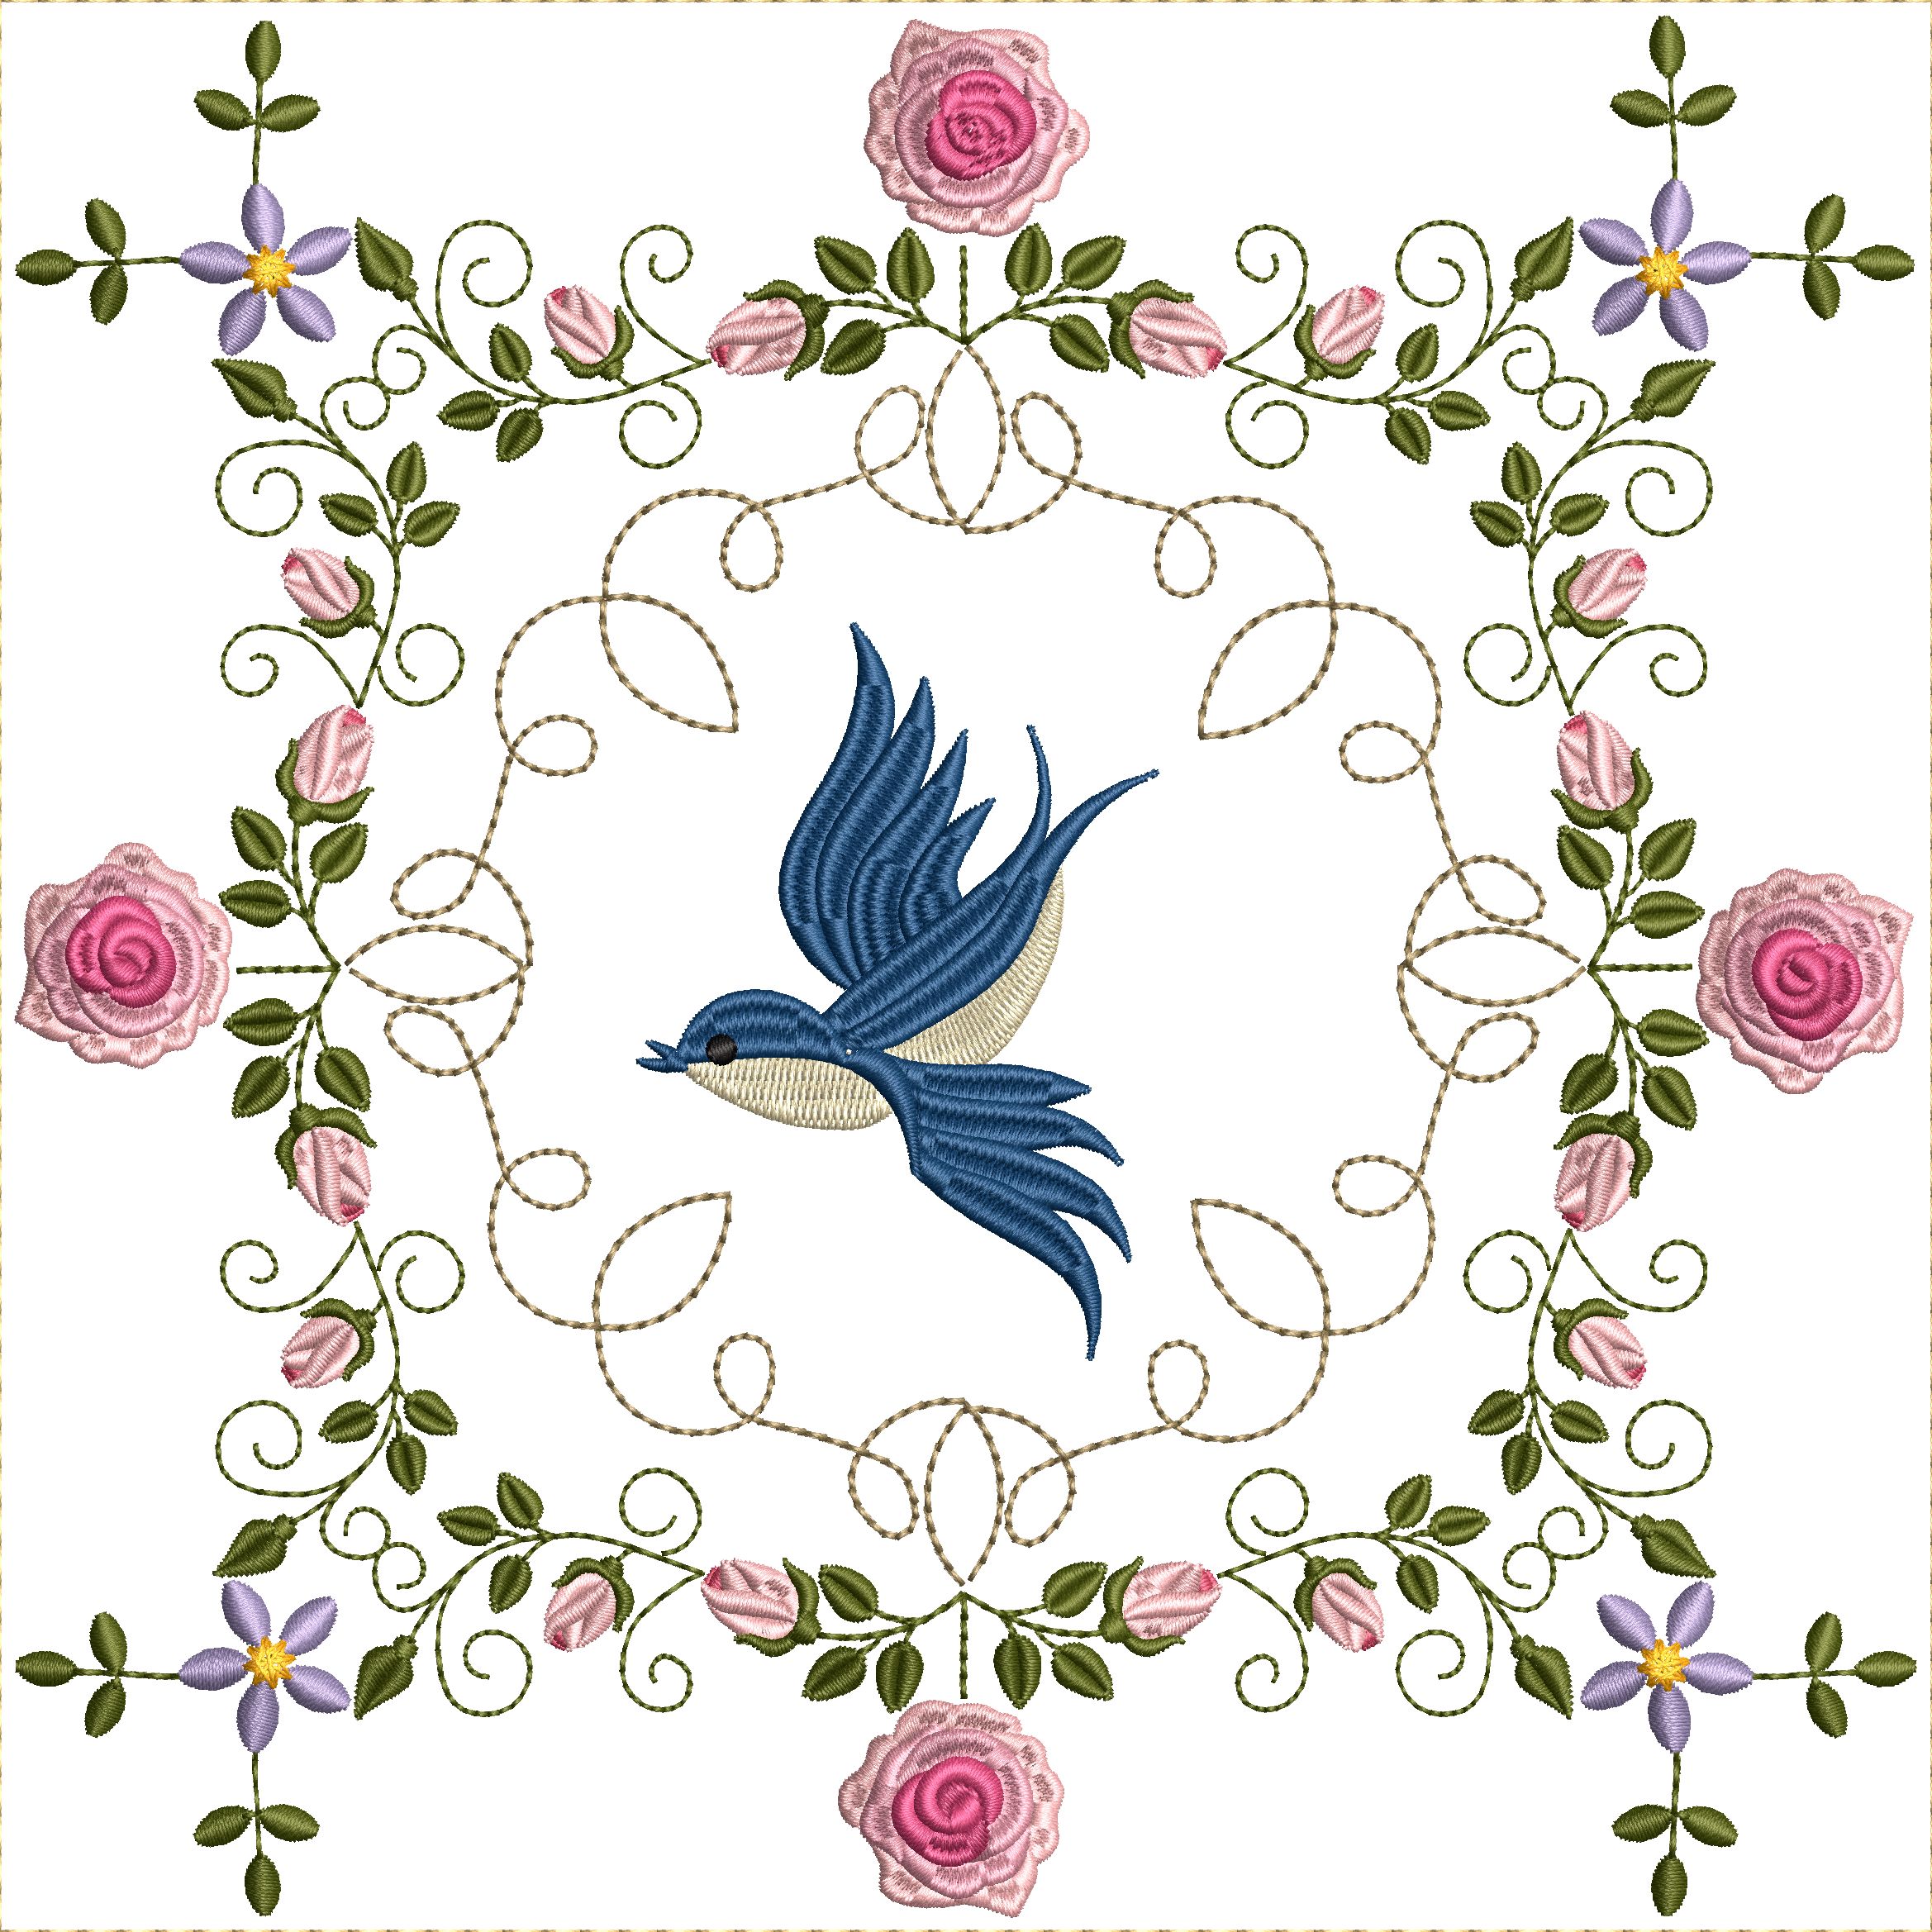 Bluebirds and Roses Quilt Blocks 8x8-21